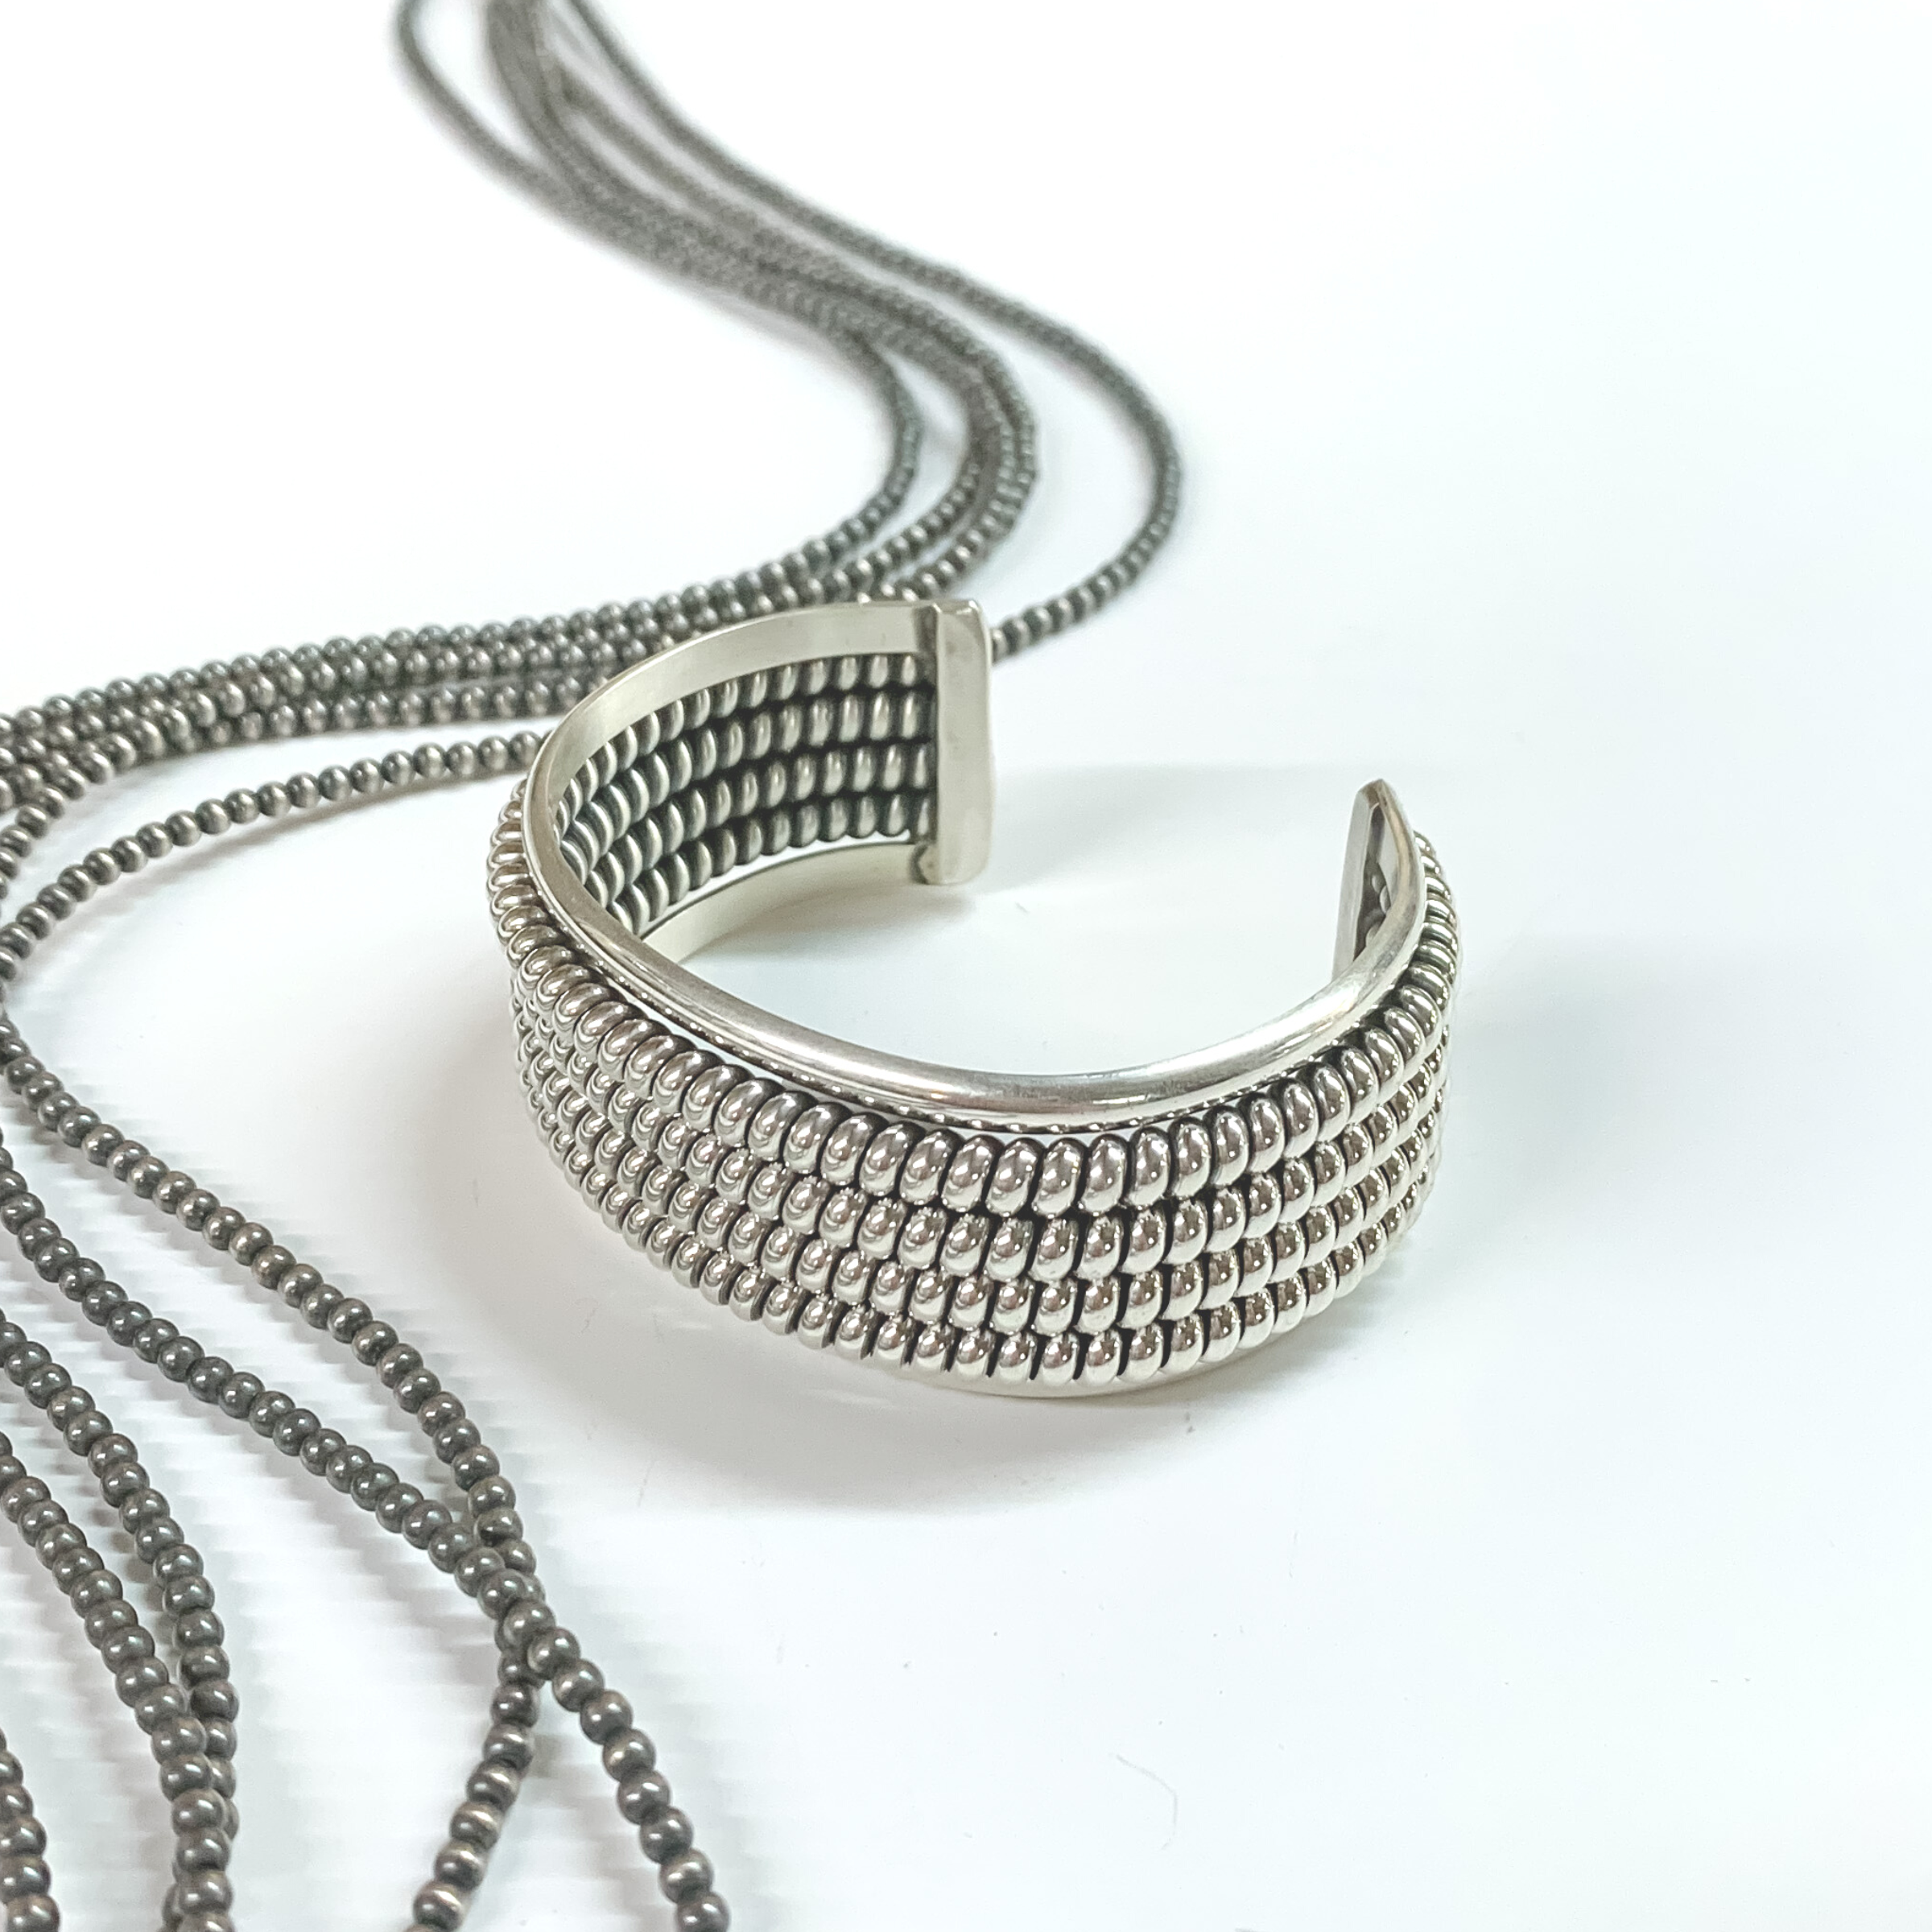 Silver cuff bracelet with a rope design. The rope design has four layers. This bracelet is pictured on a white background with silver beads on the left side. 